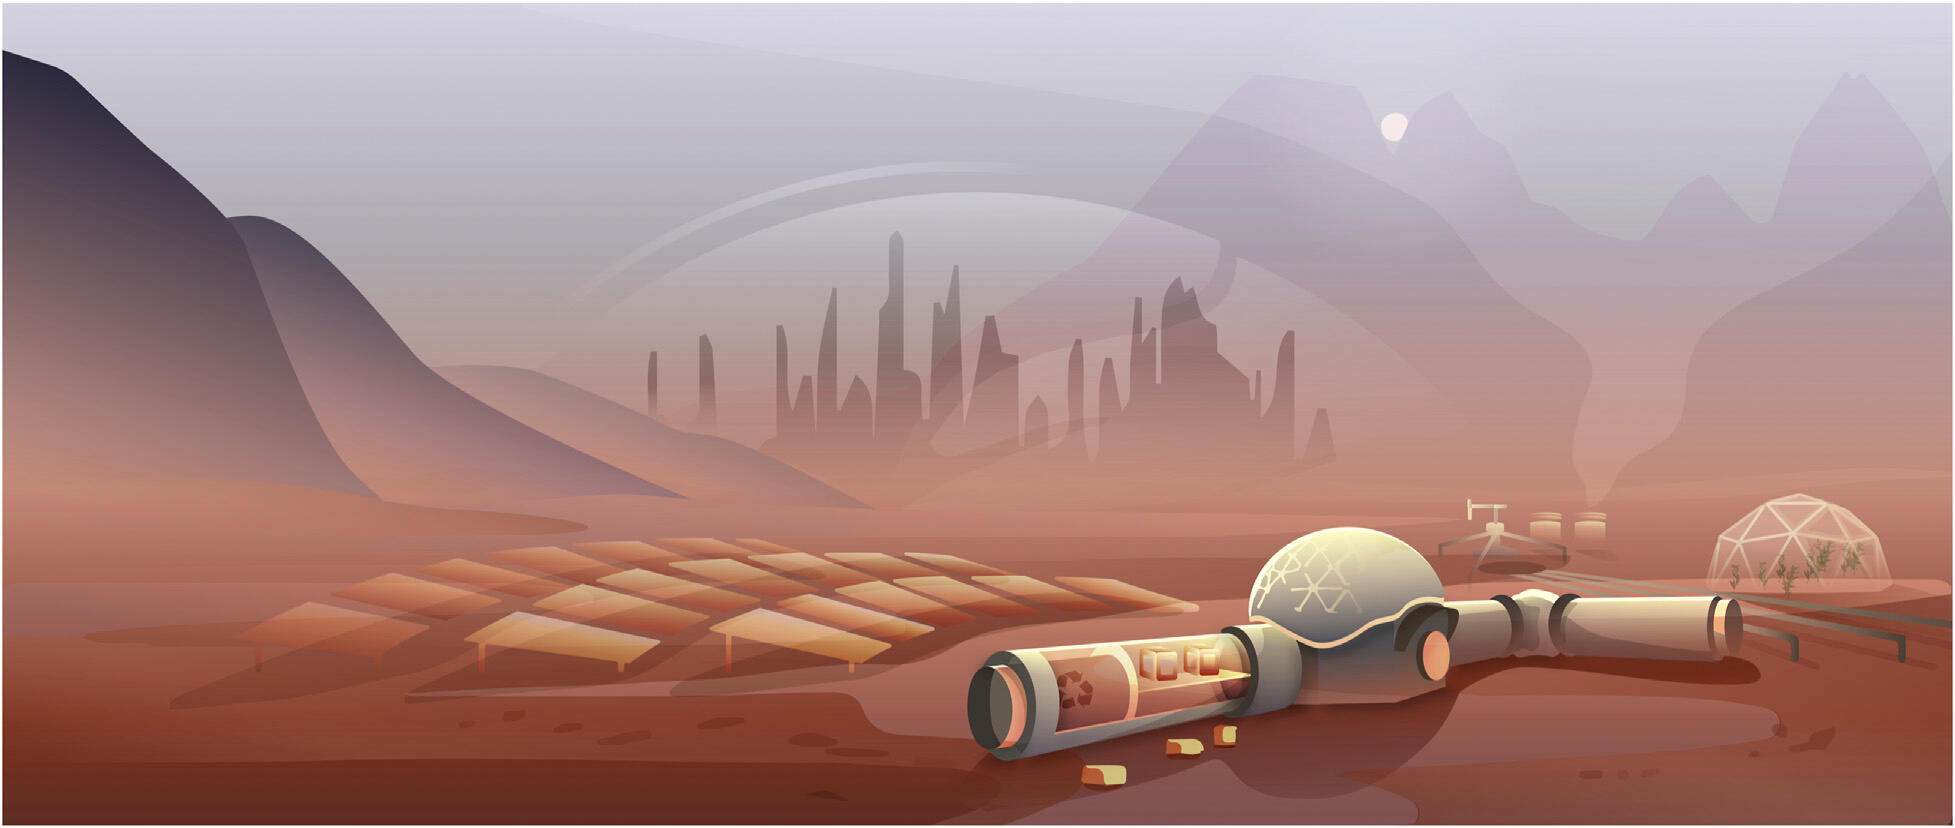 Rendition of colony on Mars